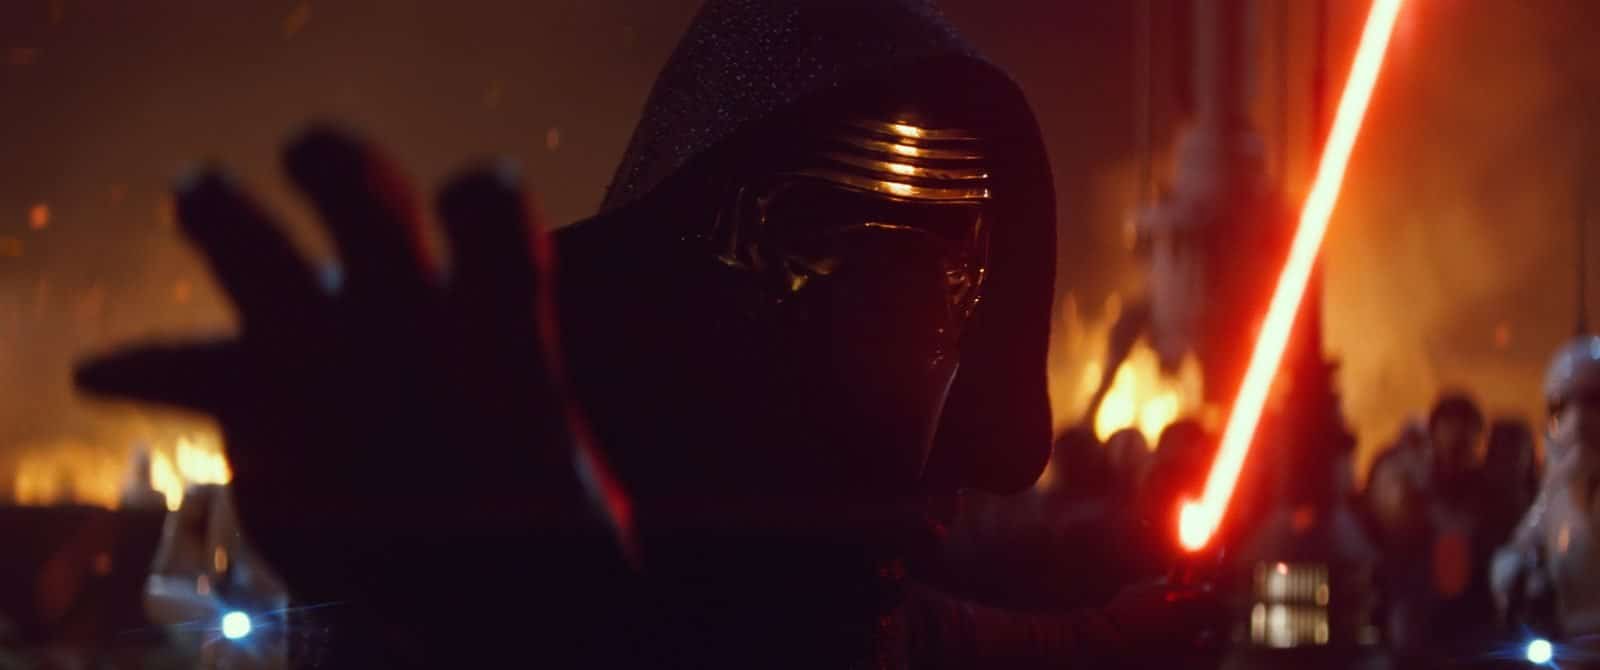 Star Wars VII The Force Awakens 29 - Kylo Ren attacks with Force